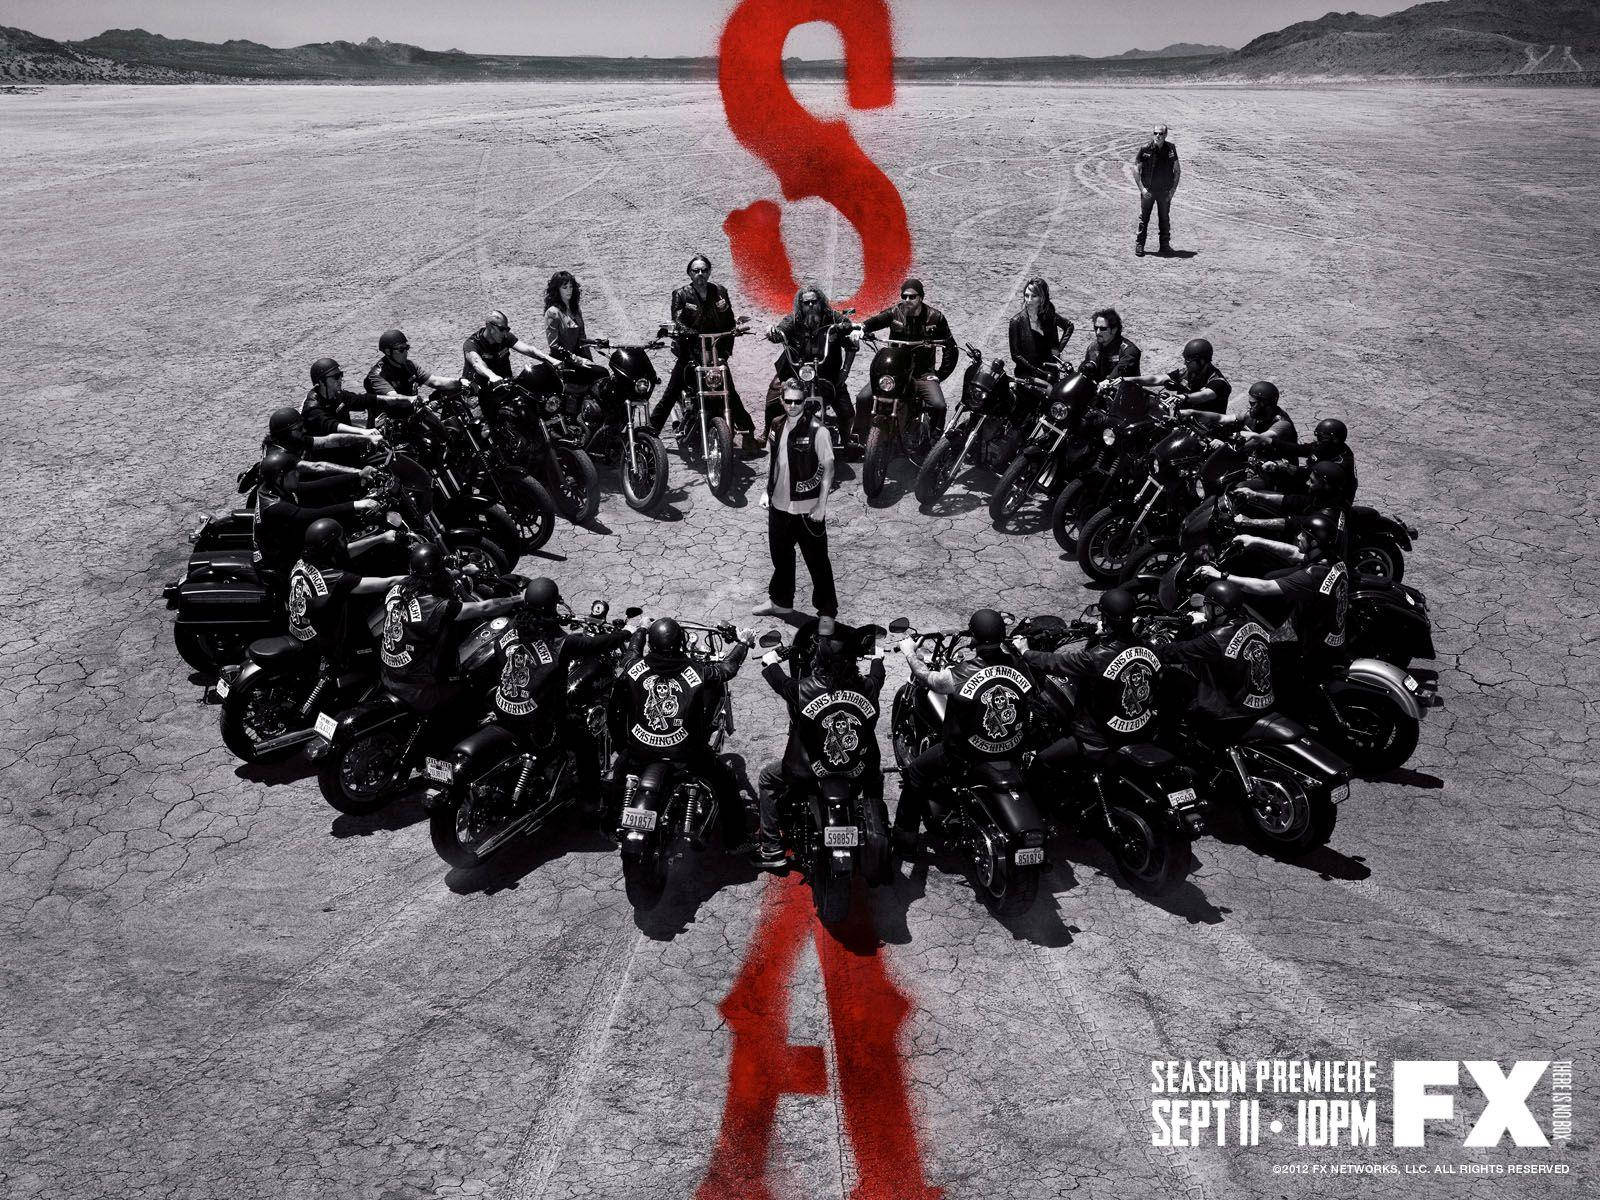 The Poster For The Season Of Sons Of Anarchy Background